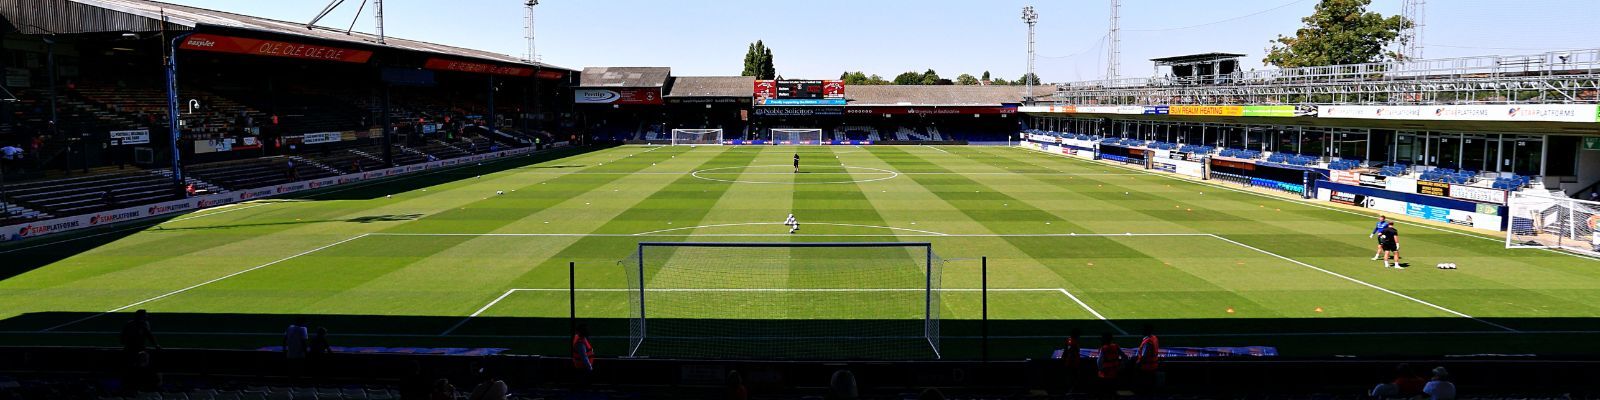 Luton Town Supporters’ Trust Podcast